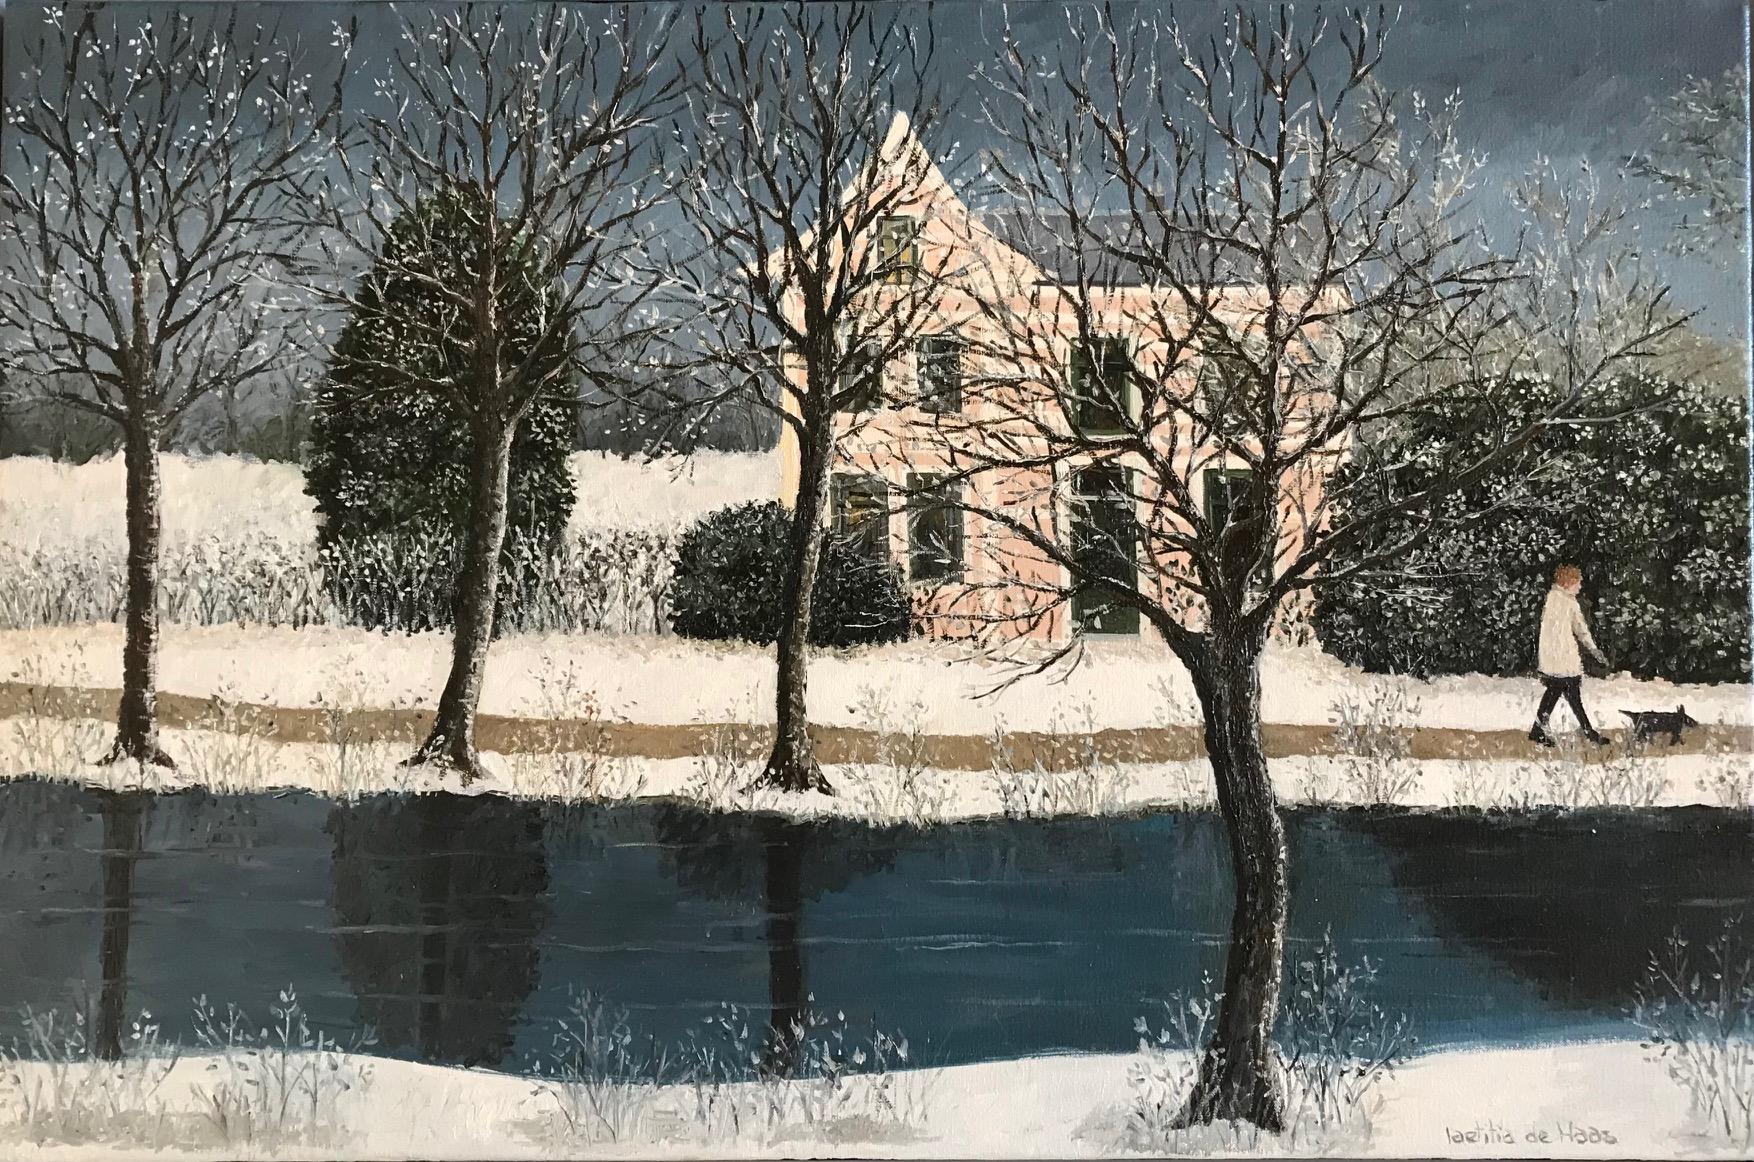 Laetitia de Haas Figurative Painting - ''Walking in a Winter Wonderland'' Cosy Dutch Painting on a Winter Day